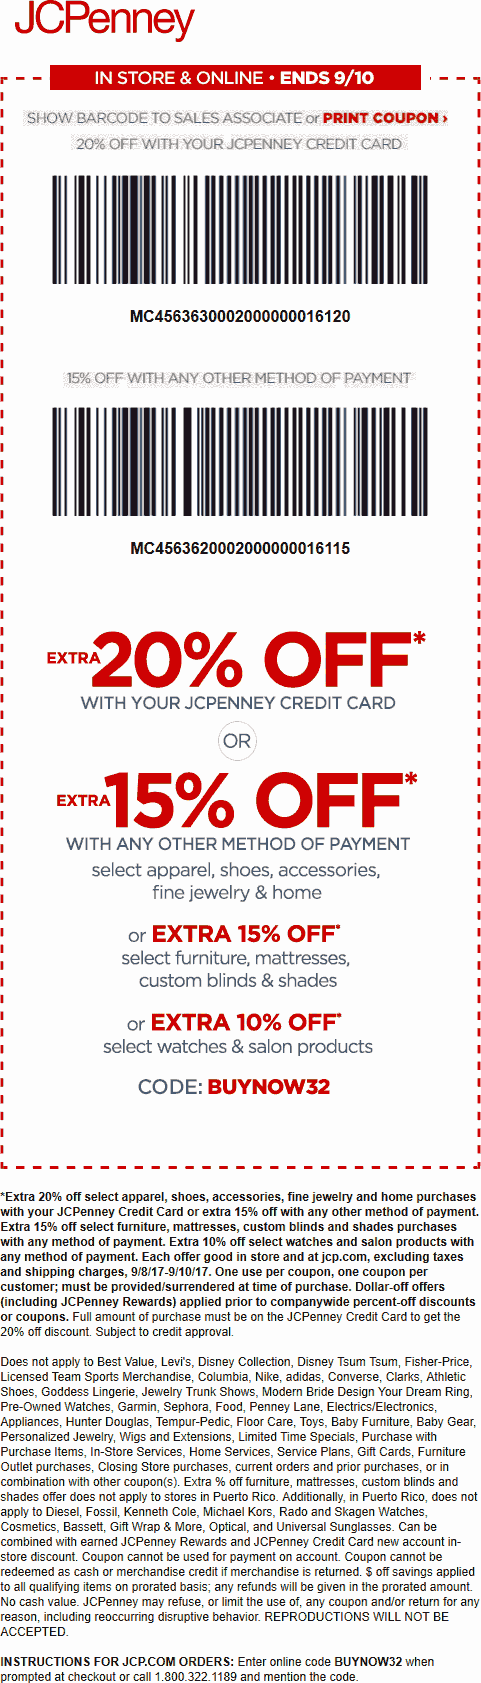 jcpenney-january-2021-coupons-and-promo-codes